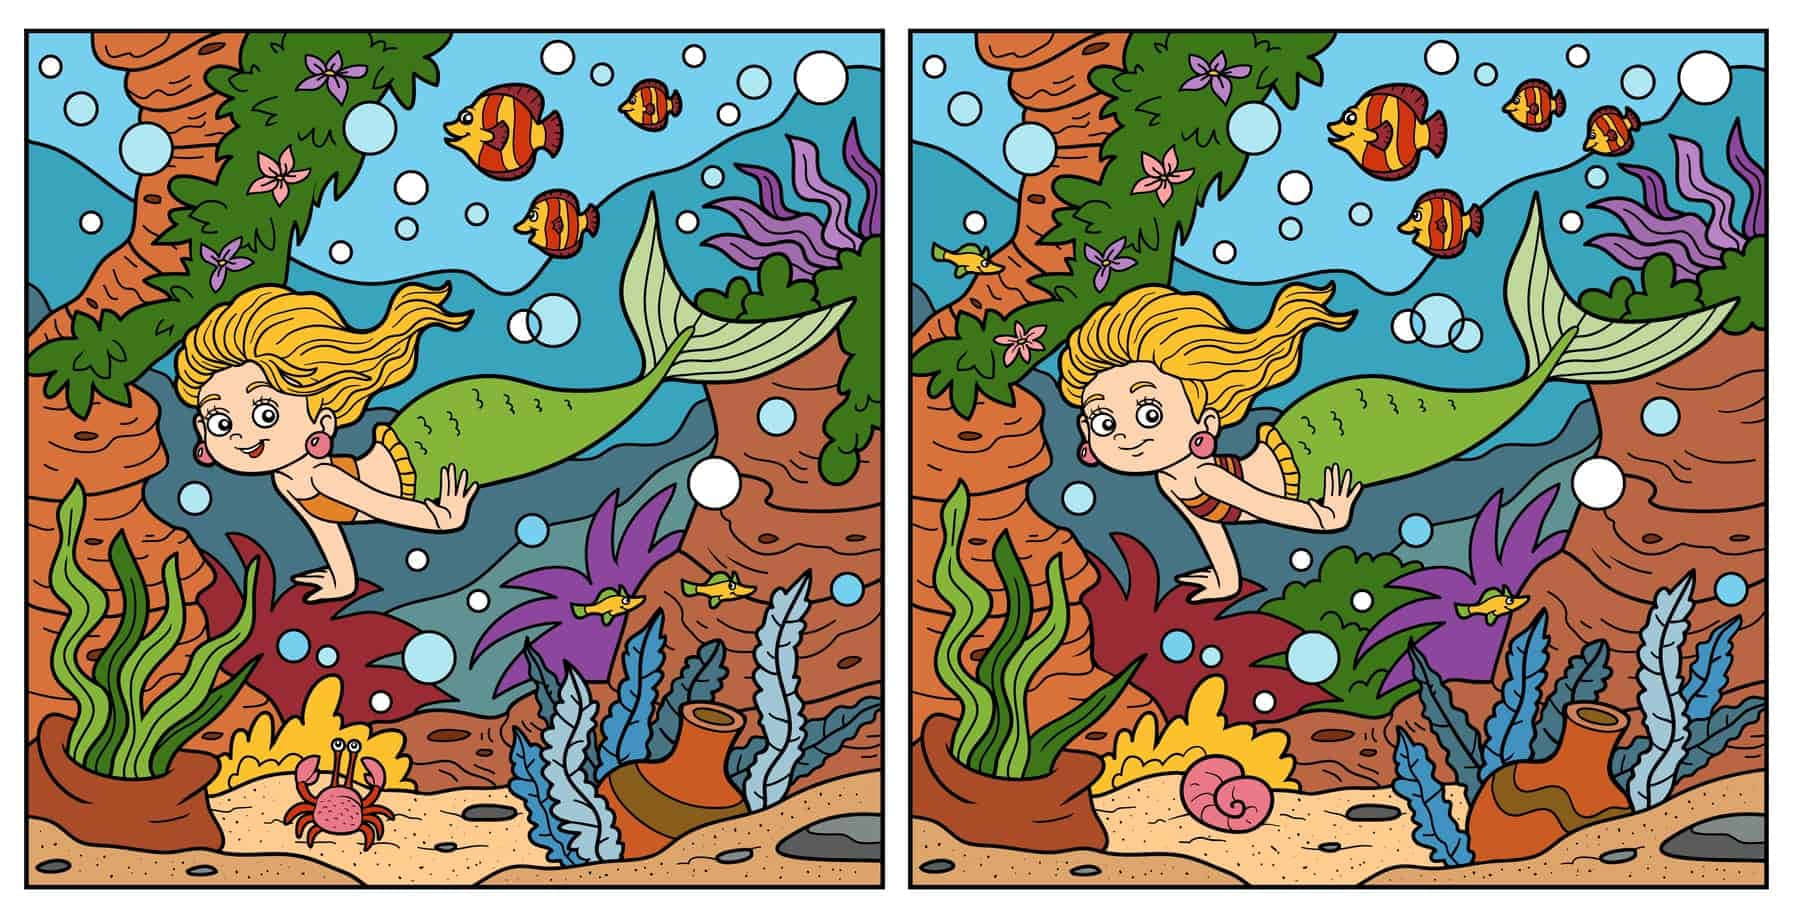 A Mermaid And Fish In The Ocean